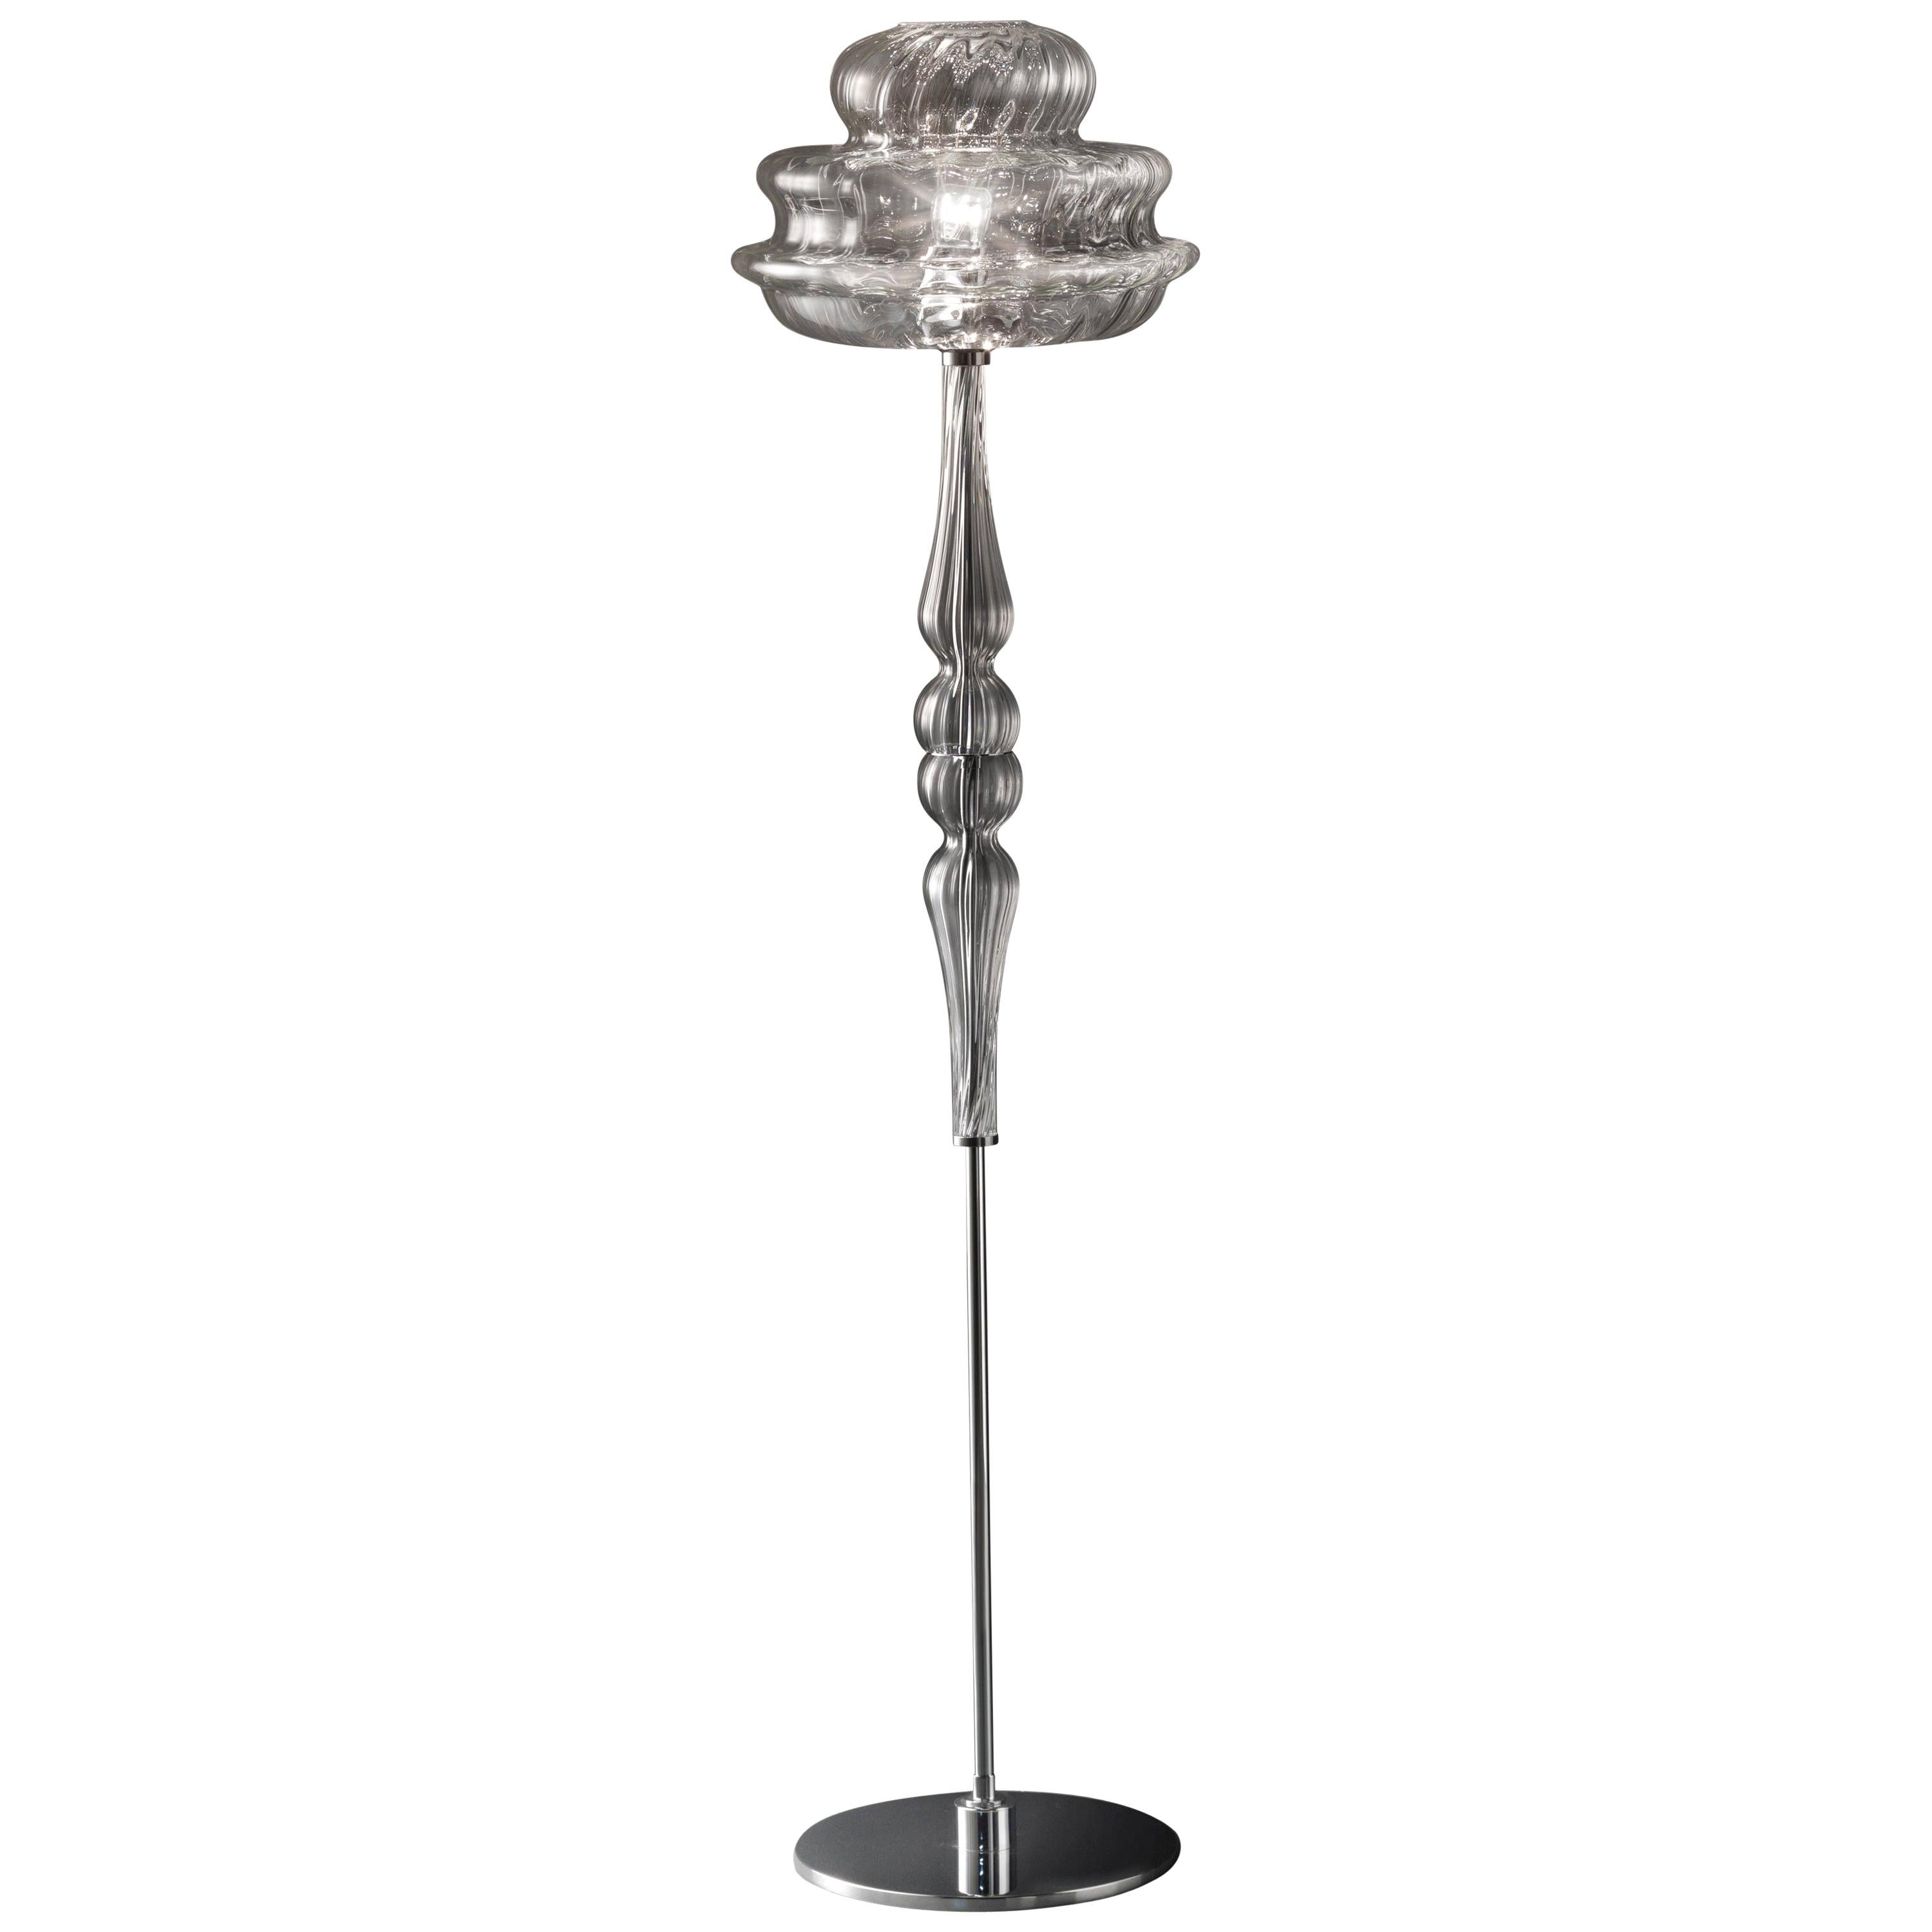 Vistosi Novecento PT Floor Lamp in Crystal Striped by Romani Saccani For Sale